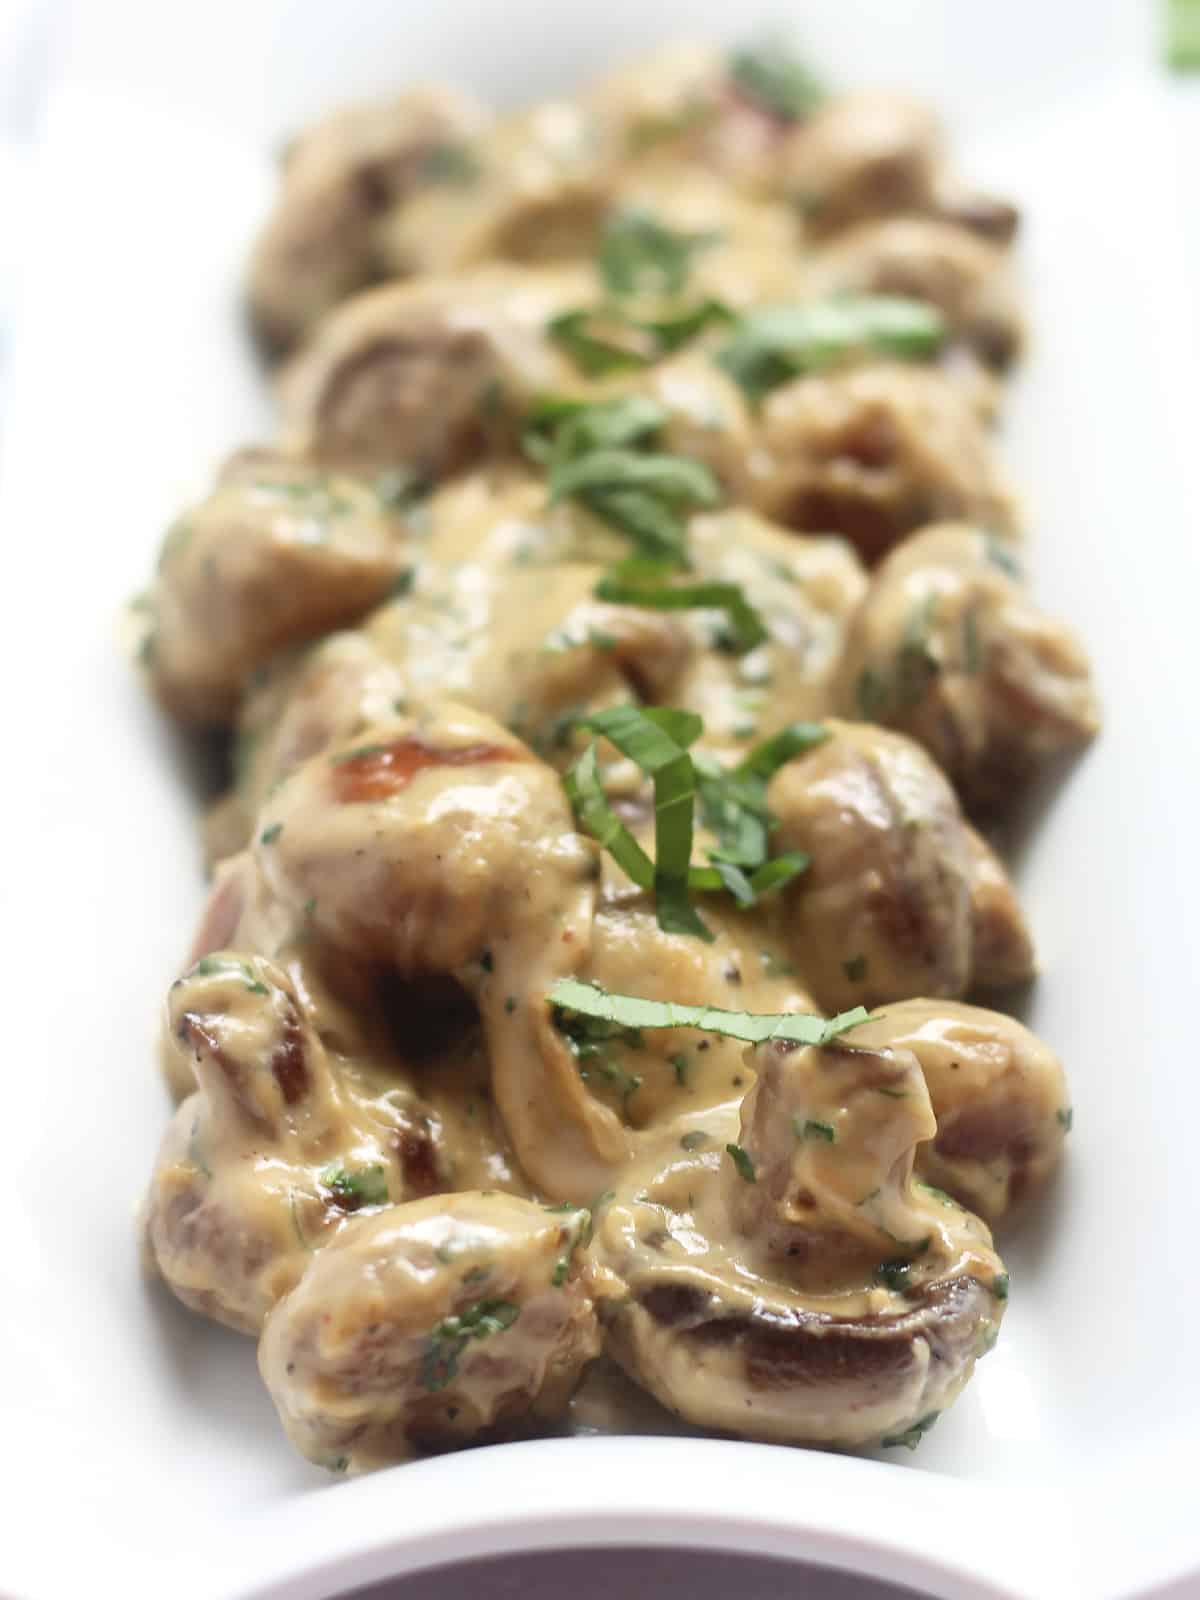 Baby mushrooms coated in cream and garnished with fresh basil.